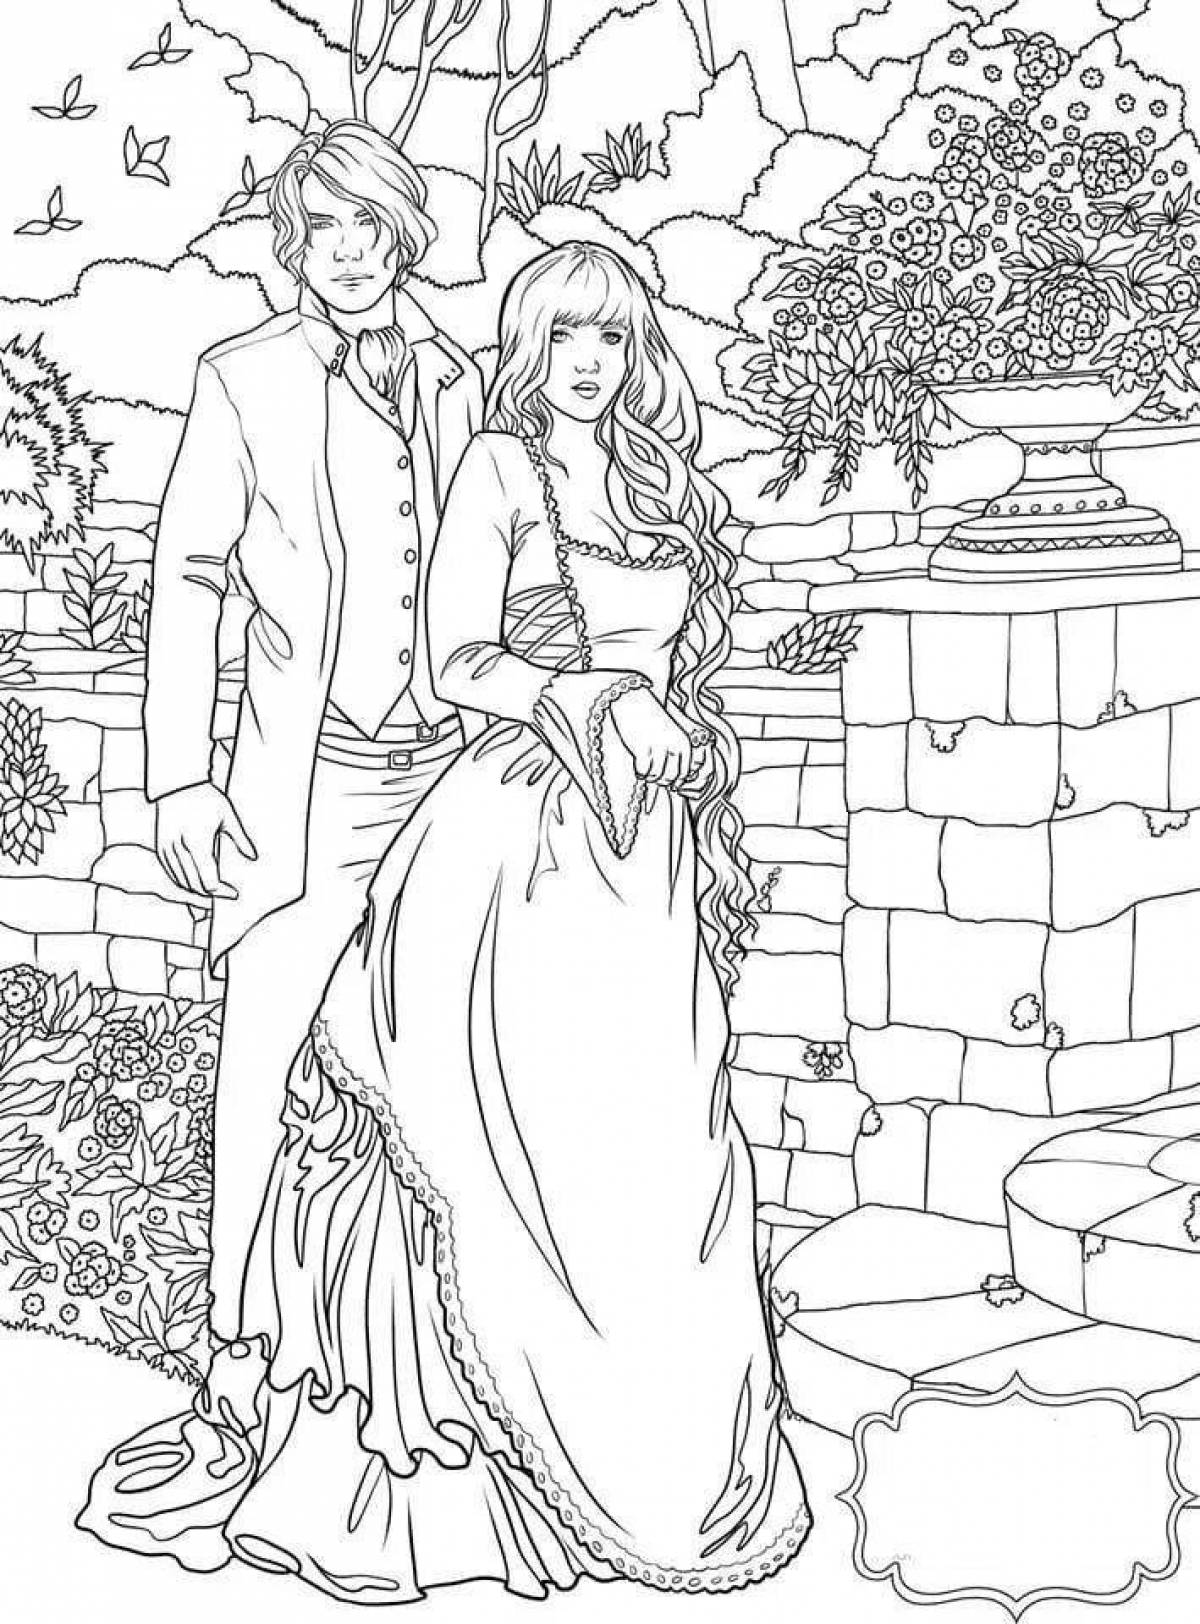 Sparkly couple coloring pages